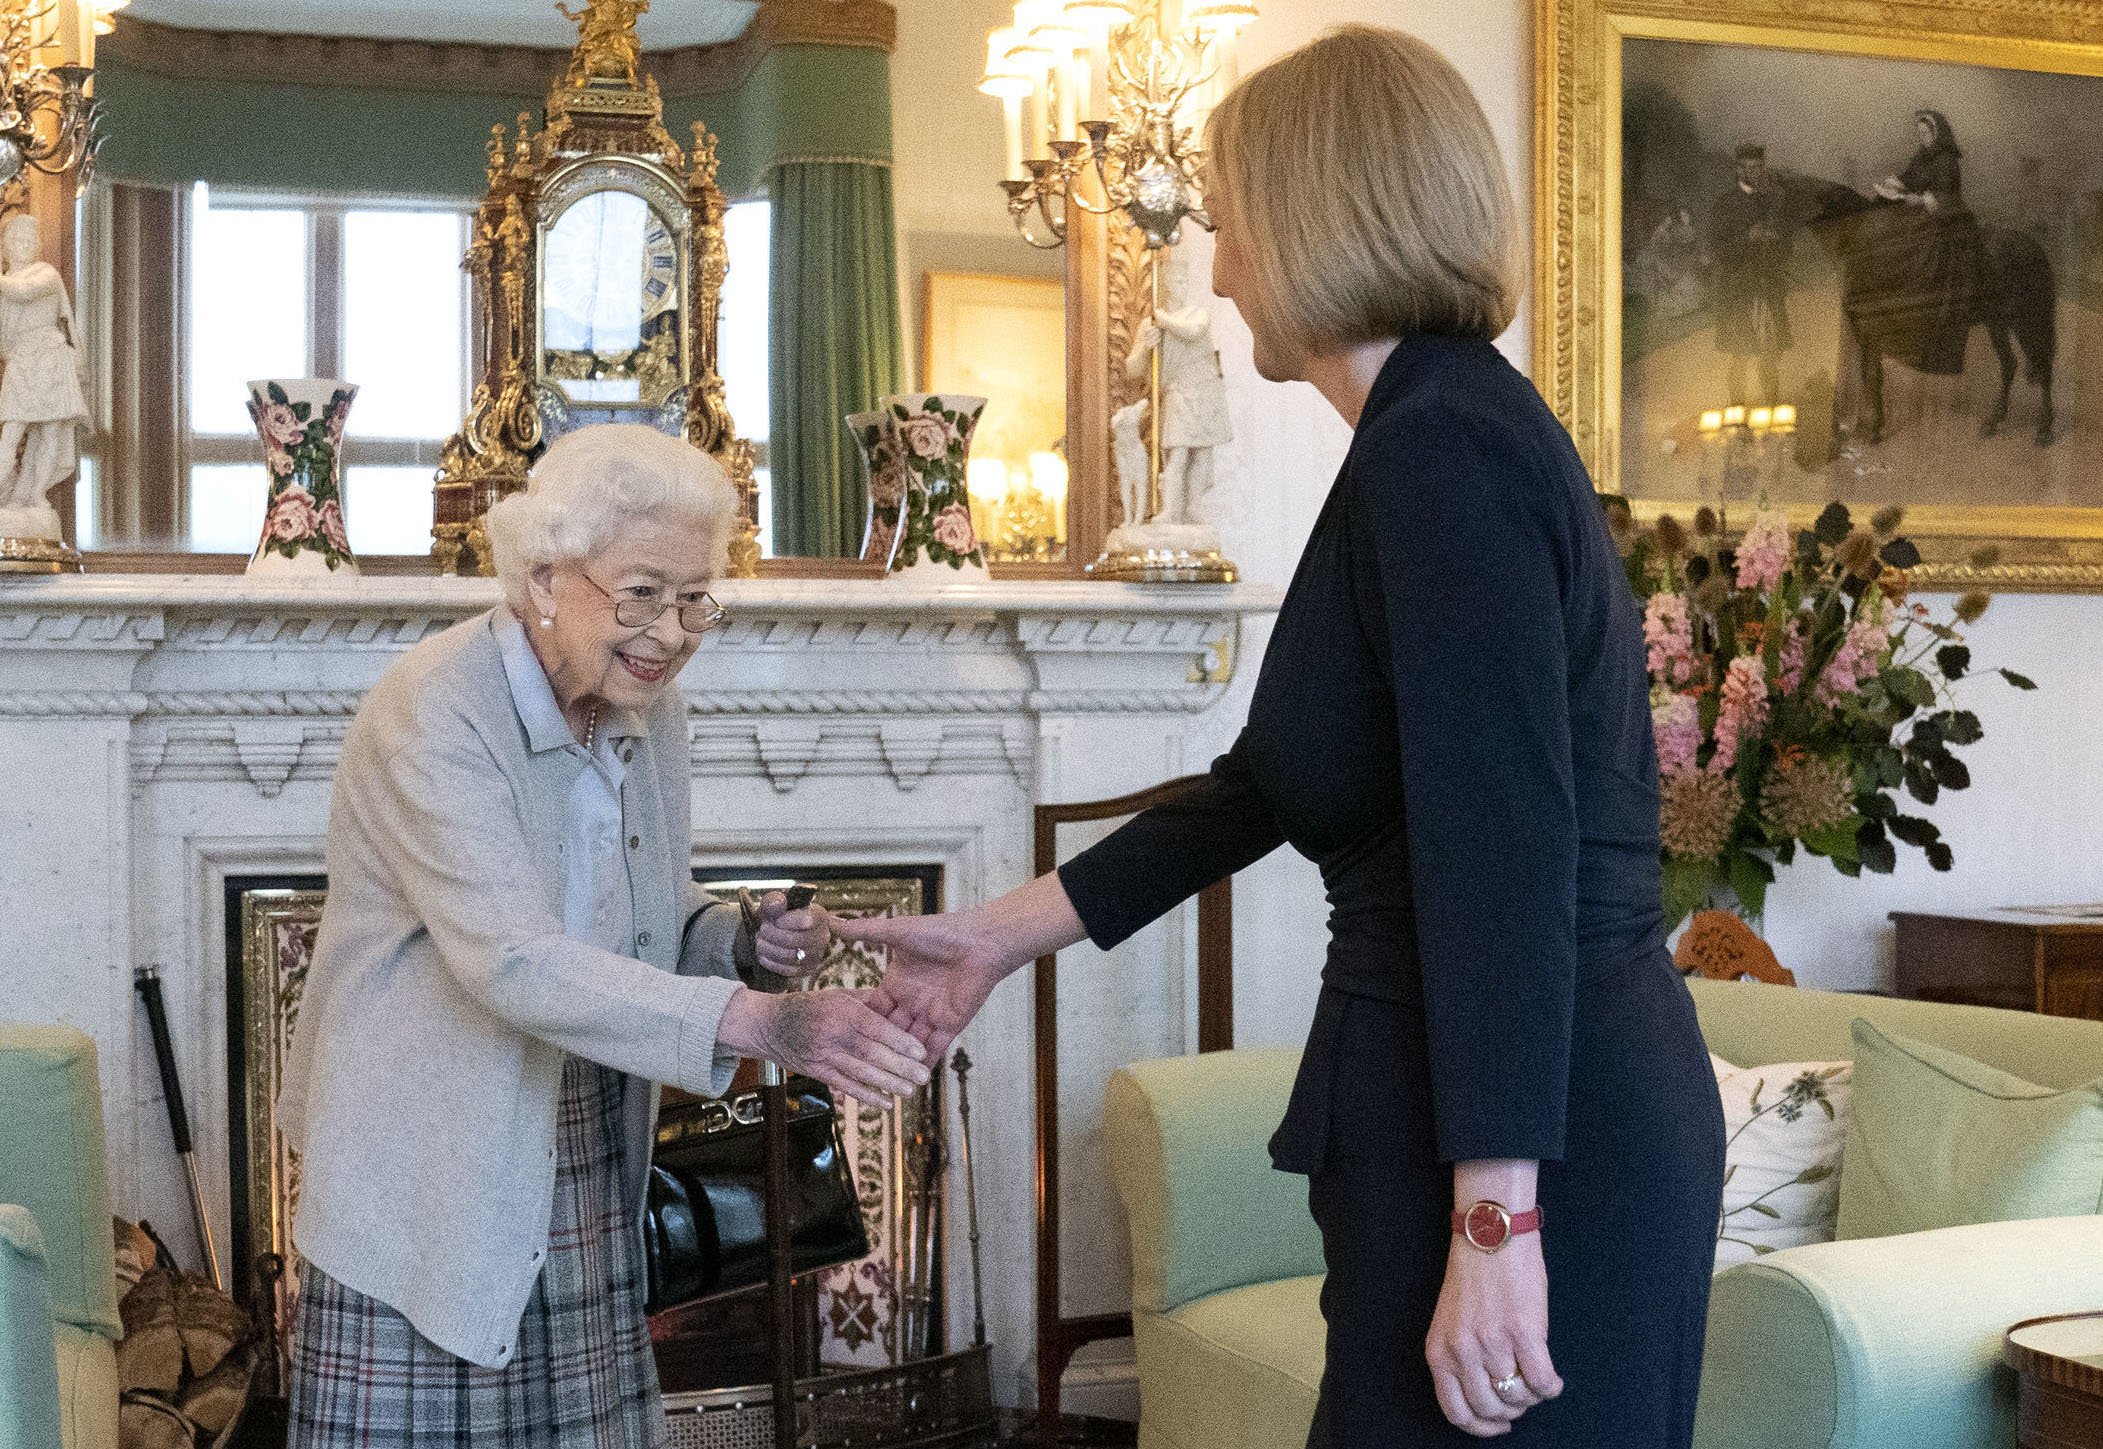 Queen Elizabeth greets newly elected leader of the Conservative party Liz Truss at Balmoral on September 6, 2022 in Aberdeen, Scotland| Source: Getty Images